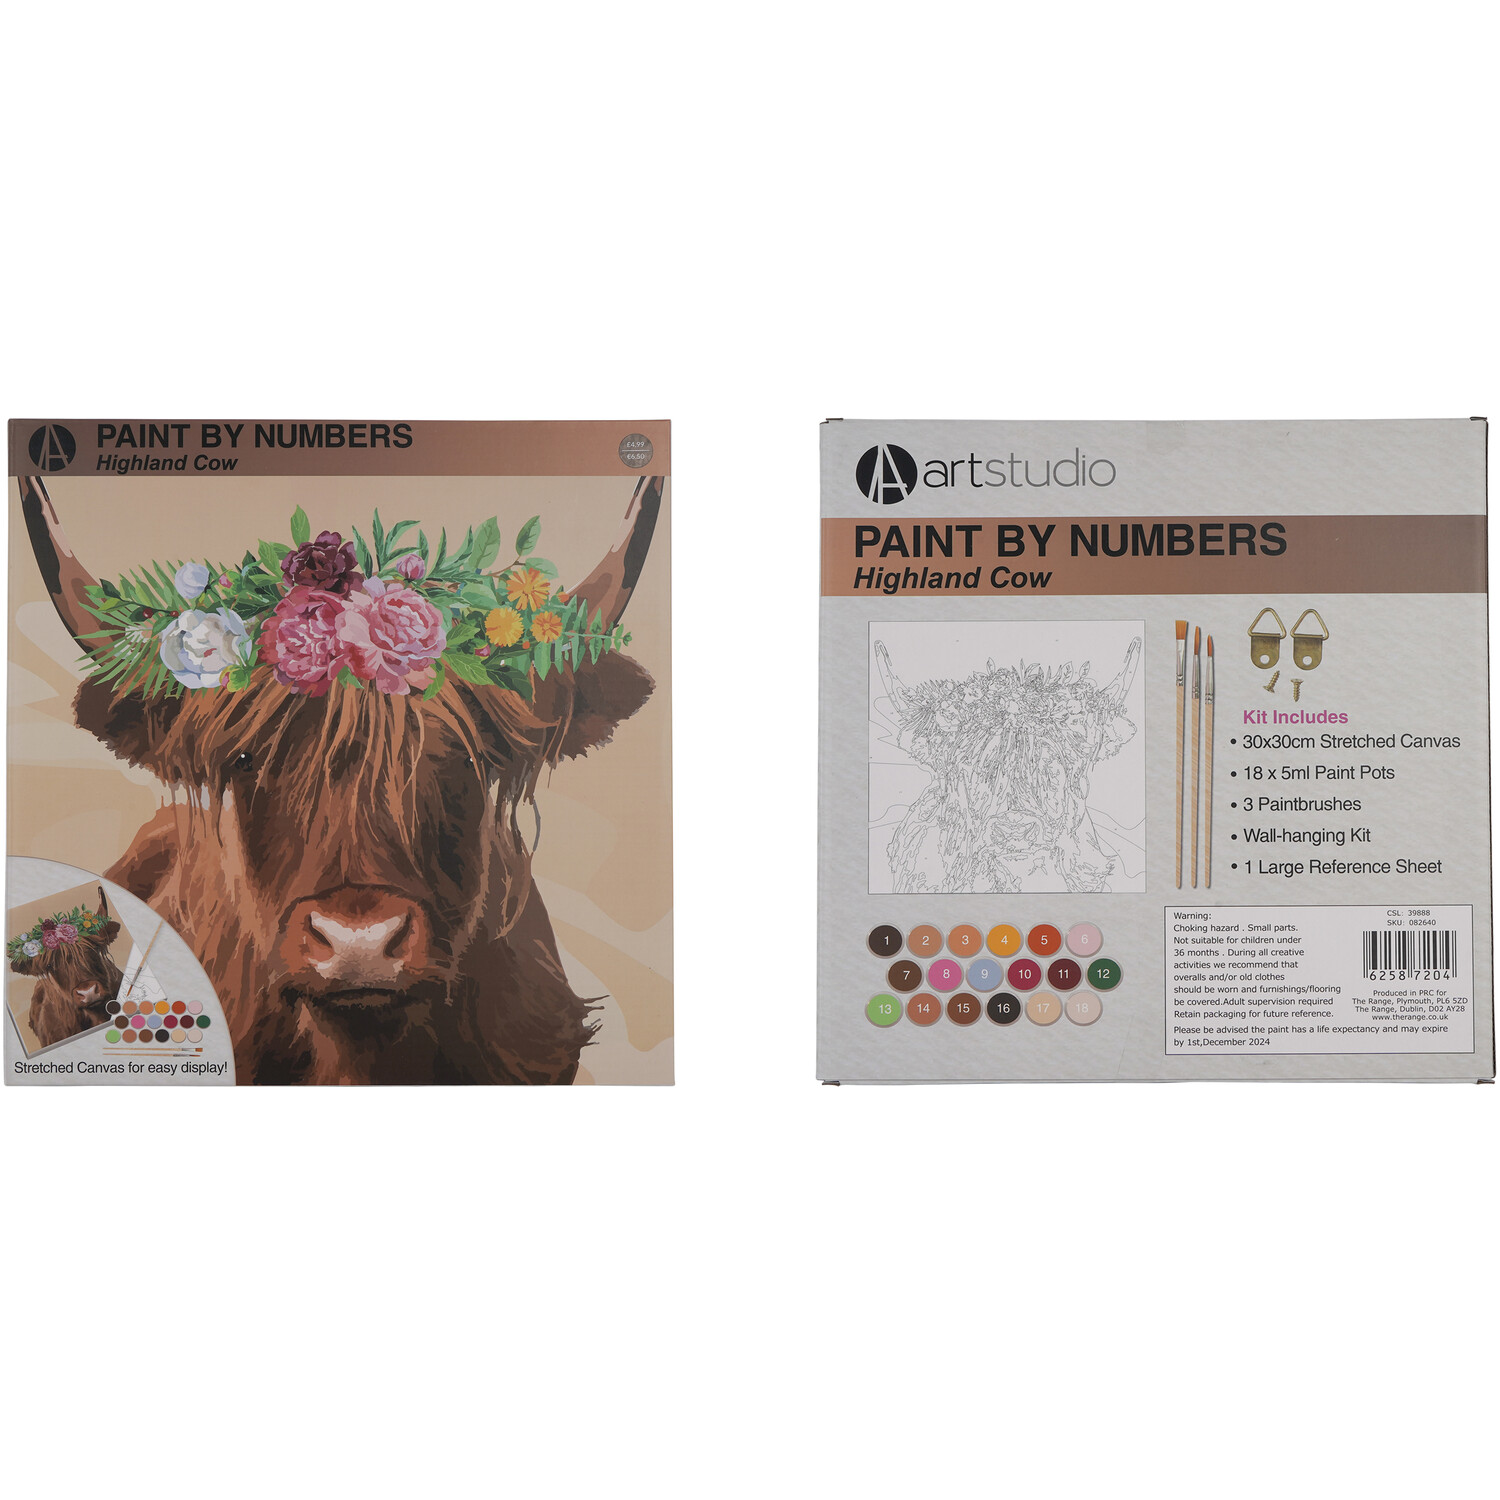 Art Studio Paint Your Own Highland Cow Kit Image 2